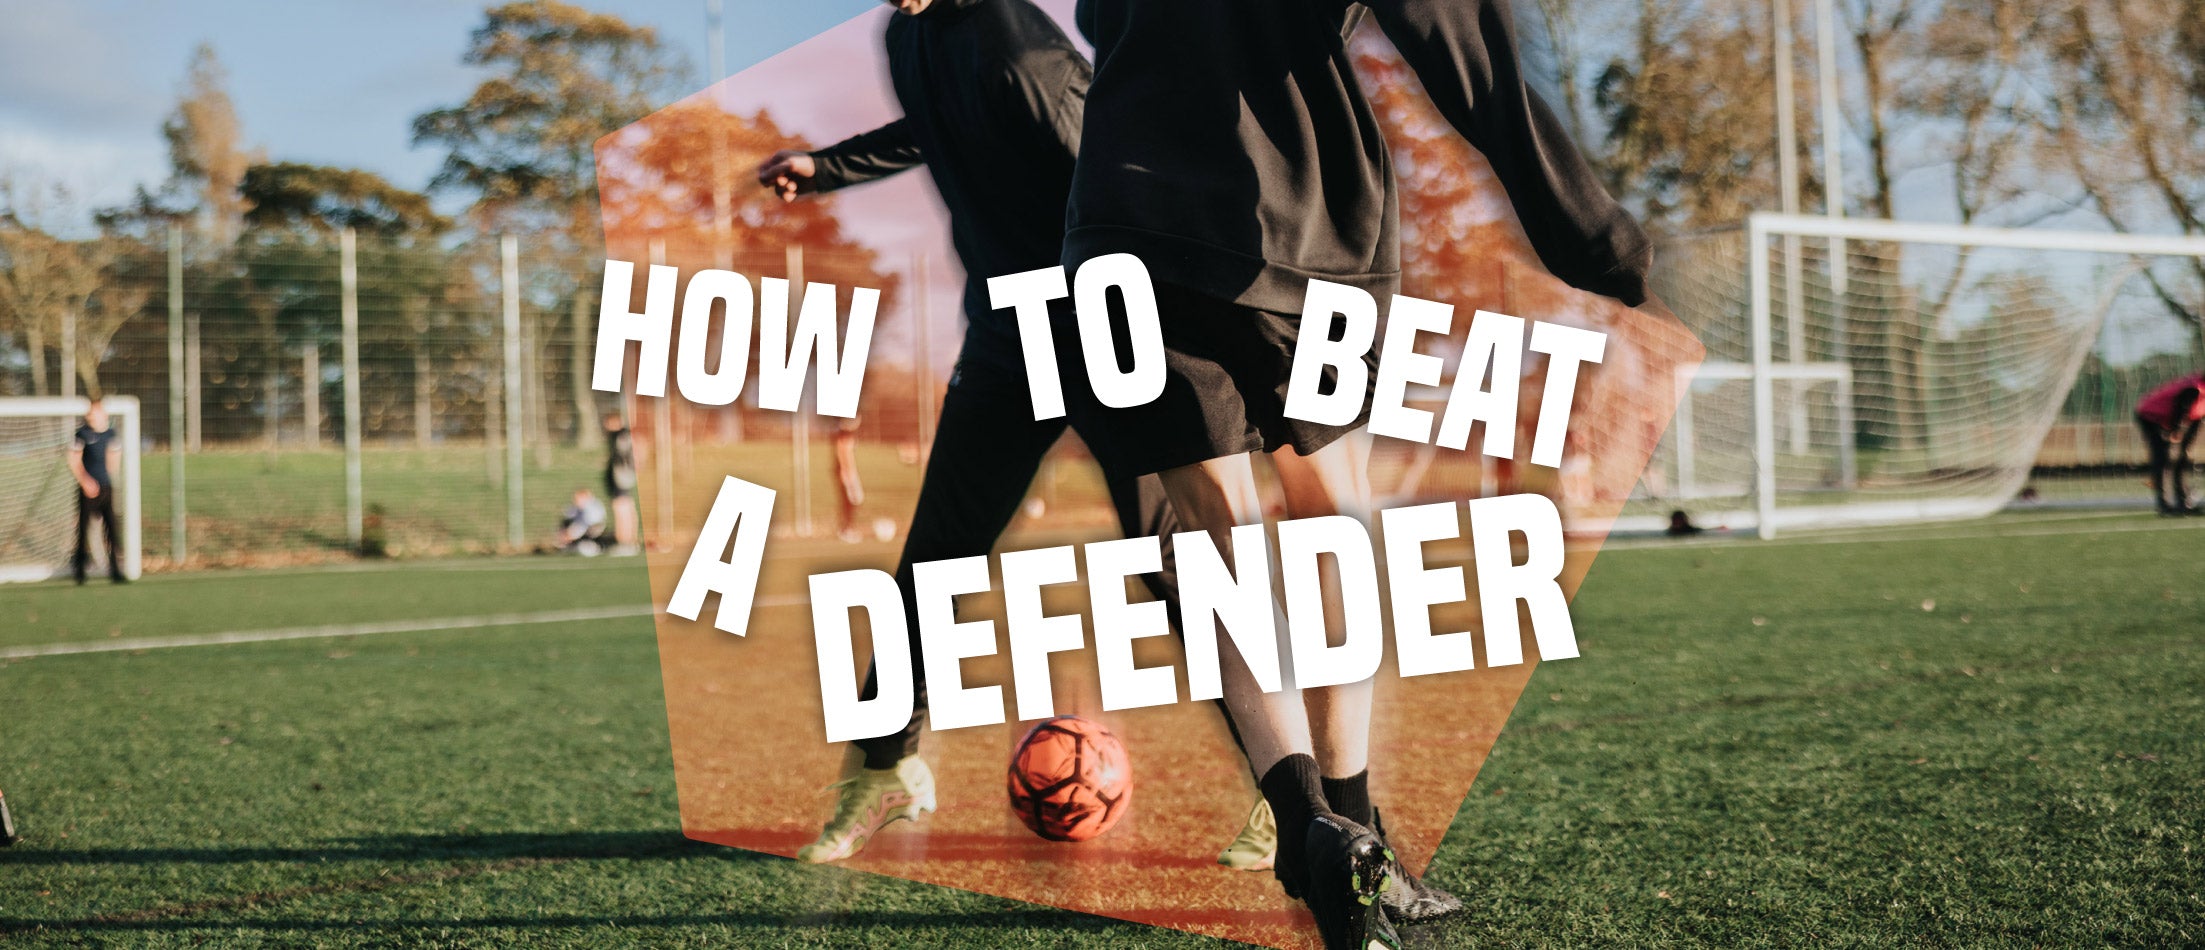 How to beat a defender: A Guide to Winning One-on-One Battles in Soccer